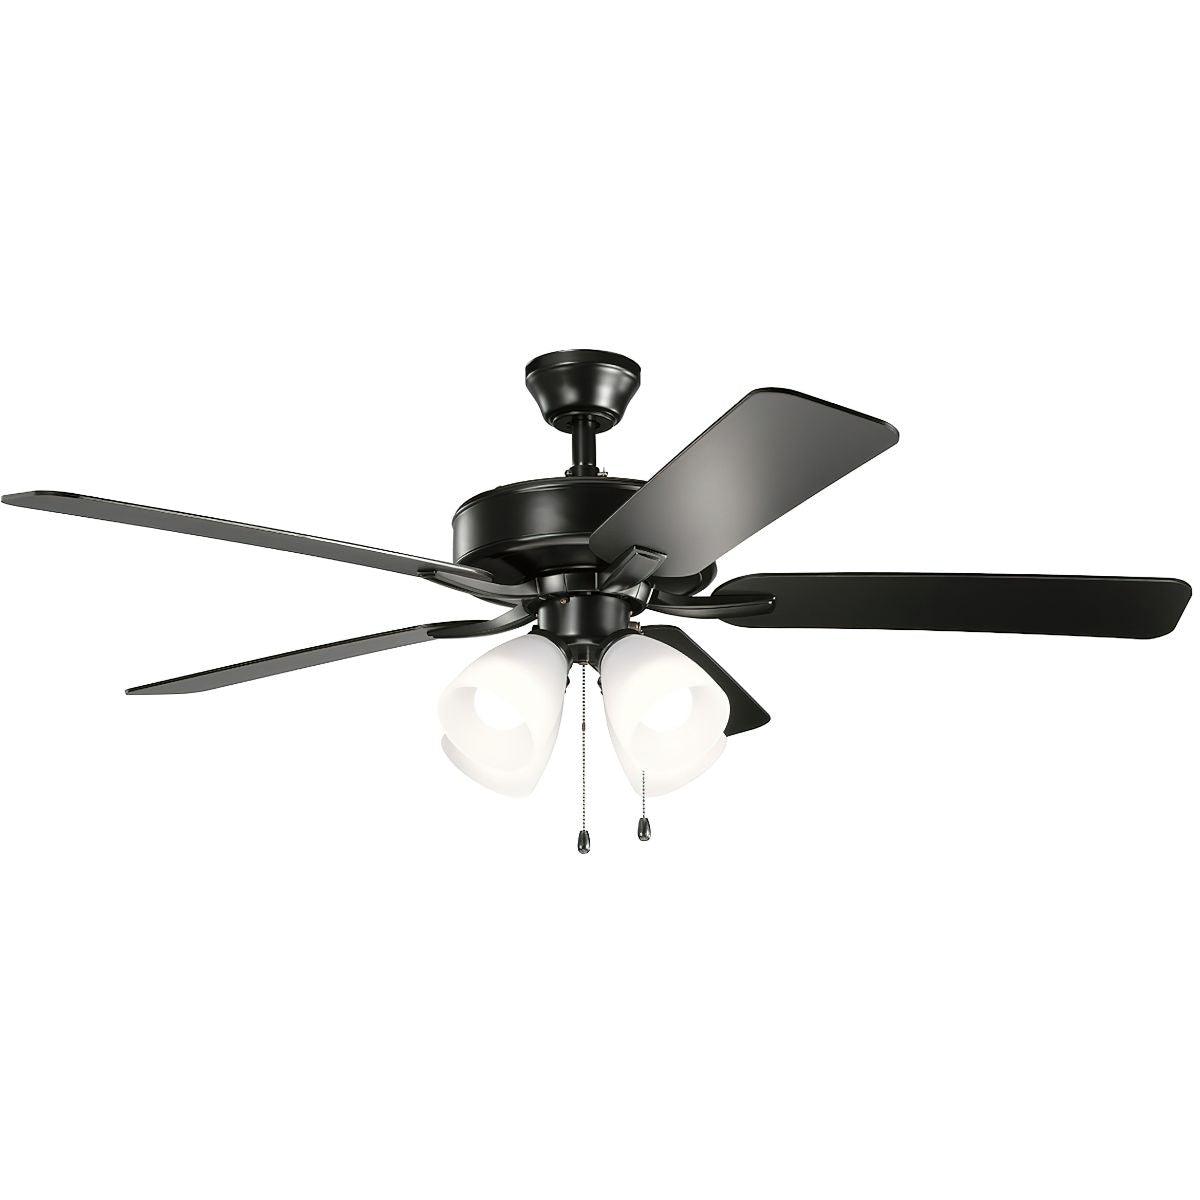 Basics Pro 52 Inch Ceiling Fan With 4 Light, Etched Glass